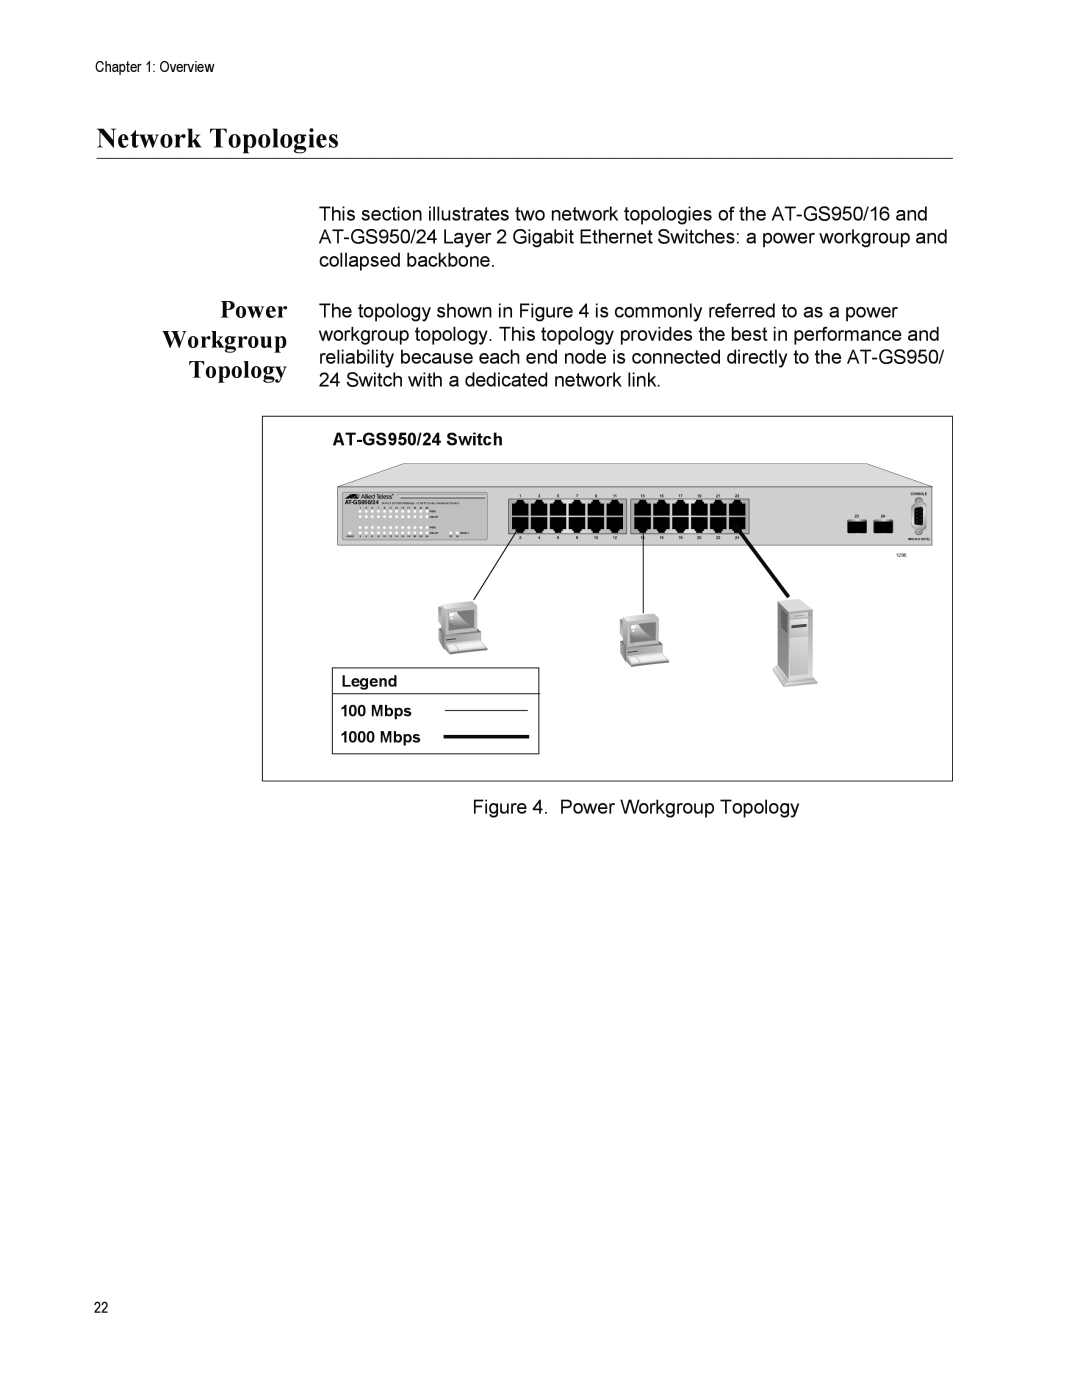 Allied Telesis AT-GS950/16-10 manual Network Topologies, Power Workgroup Topology 